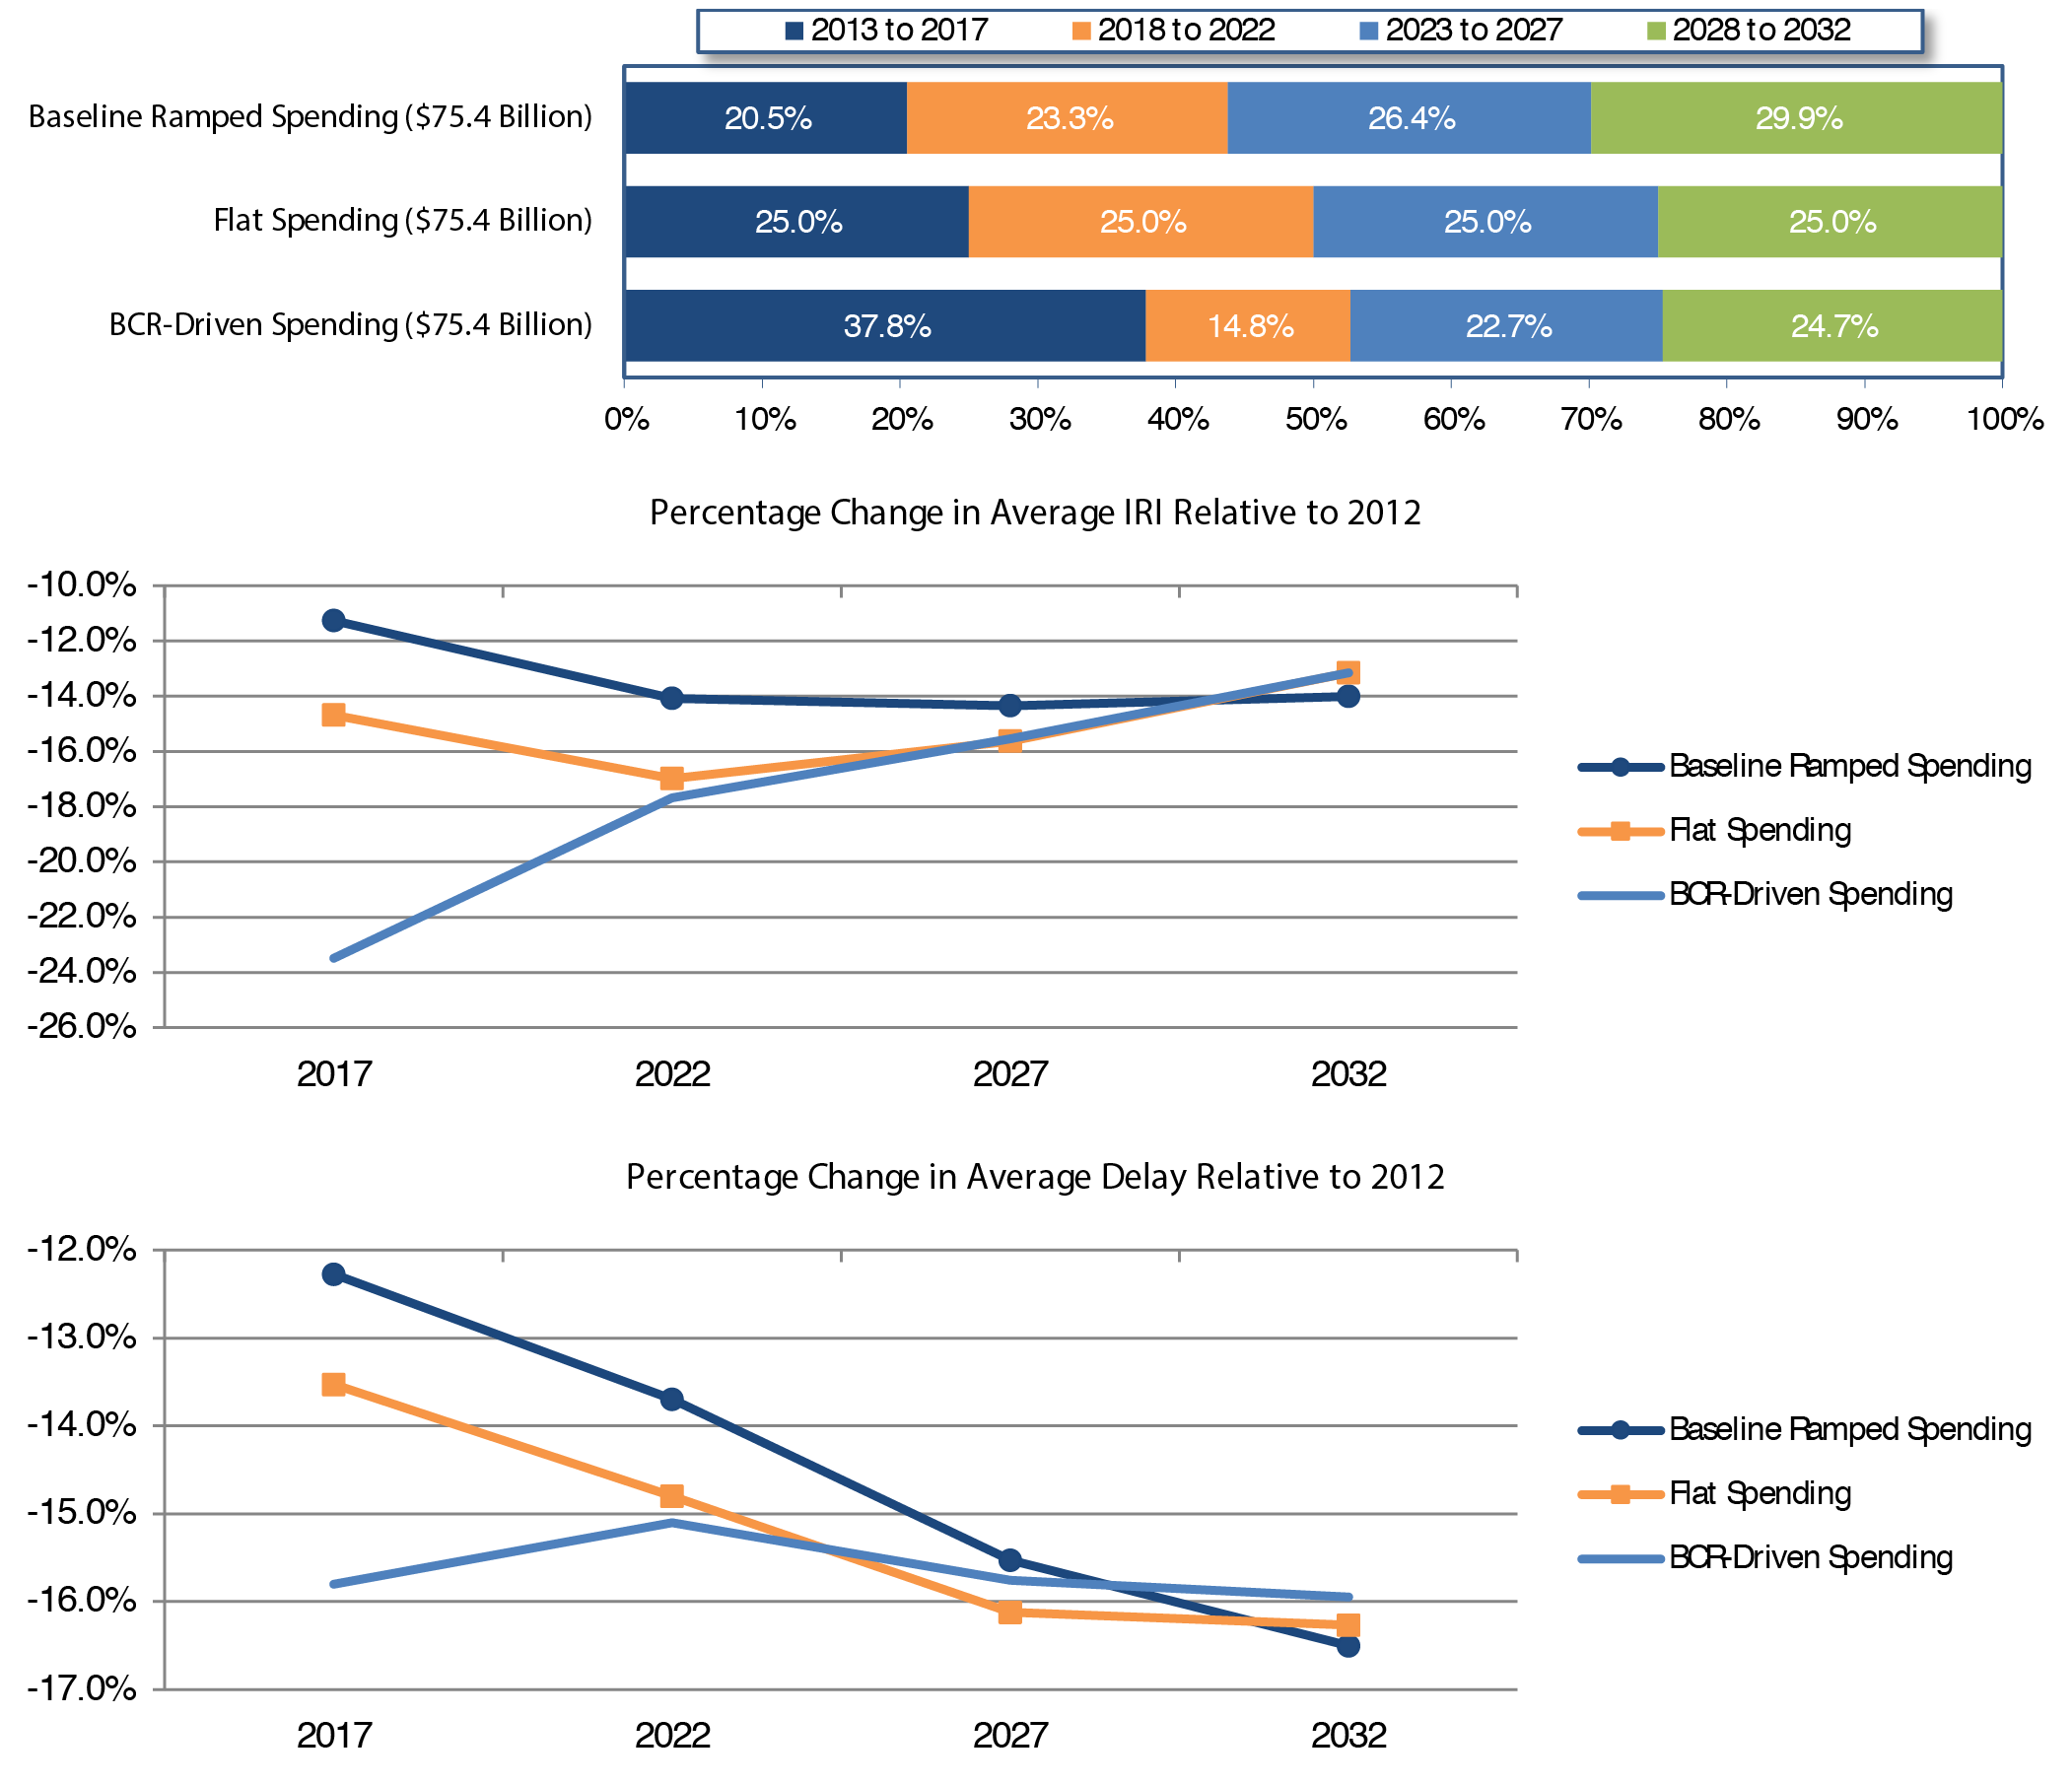 A stacked bar chart plots percentages for three scenarios-baseline ramped spending, flat spending, and BCR-driven spending-for four 5-year funding periods considered in HERS. For baseline ramped spending, 20.5 percent of the total 20-year investment occurs in the first 5-year period of 2013 to 2017, 23.3 percent of the total 20-year investment occurs during 2018 to 2022, 26.4 percent of the total 20-year investment occurs during 2023 to 2027, and 29.9 percent of total investment occurs for the last 5-year period 2028 to 2032. For flat spending, 25.0 percent of the total 20-year investment occurs in each of the 5-year periods over 2013 to 2032. For BCR-spending, 37.8 percent of the total 20-year investment occurs in the first 5-year period of 2013 to 2017, 14.8 percent of the total 20-year investment occurs during 2018 to 2022, 22.7 percent of the total 20-year investment occurs during 2023 to 2027, and 24.7 percent of total investment occurs for the last 5-year period 2028 to 2032. The middle line chart presents percentage changes of average pavement roughness as measured by IRI compared with the 2012 level under the three investment cases. BCR-driven spending case yields an improvement in pavement conditions in the first 5-year period, represented by a large drop in average IRI of 23.5 percent from its 2012 level. The improvement under the BCR-driven spending alternative decreases to 13.2 percent by the last 5-year period. Steady pavement improvement over time occurs for baseline ramped spending and flat spending assumptions. In the first 5 years, average IRI decreases by 14.7 percent (relative to the 2012 level) under the flat spending case, and the descending trend continues across the rest of the analysis periods and ends at 13.2 percent during the last 5-year period. The baseline ramped spending assumption leads to an 11.3-percent drop in average IRI in the first 5-year period and further improvement in pavement occurs afterwards, ending at 14.0 percent during the last 5-year period. The decreases of average IRI are similar by 2032 under all three cases. The bottom line chart illustrates the percentage change of average delay relative to its 2012 level under the three investment cases. In the first 5 years, the BCR-driven spending approach results in the largest reduction in average delay per VMT of 15.8 percent , and the baseline ramped spending the smallest reduction of 12.3 percent . The percentage of delay reduction grows over time under the baseline ramped and flat spending cases, but percentage change of average delay is stable under BCR-driven spending. By the end of the 20-year analysis period, the difference between projected average delay and the 2012 delay is approximately 16 percent under all three alternatives. Source: Highway Economic Requirements System.